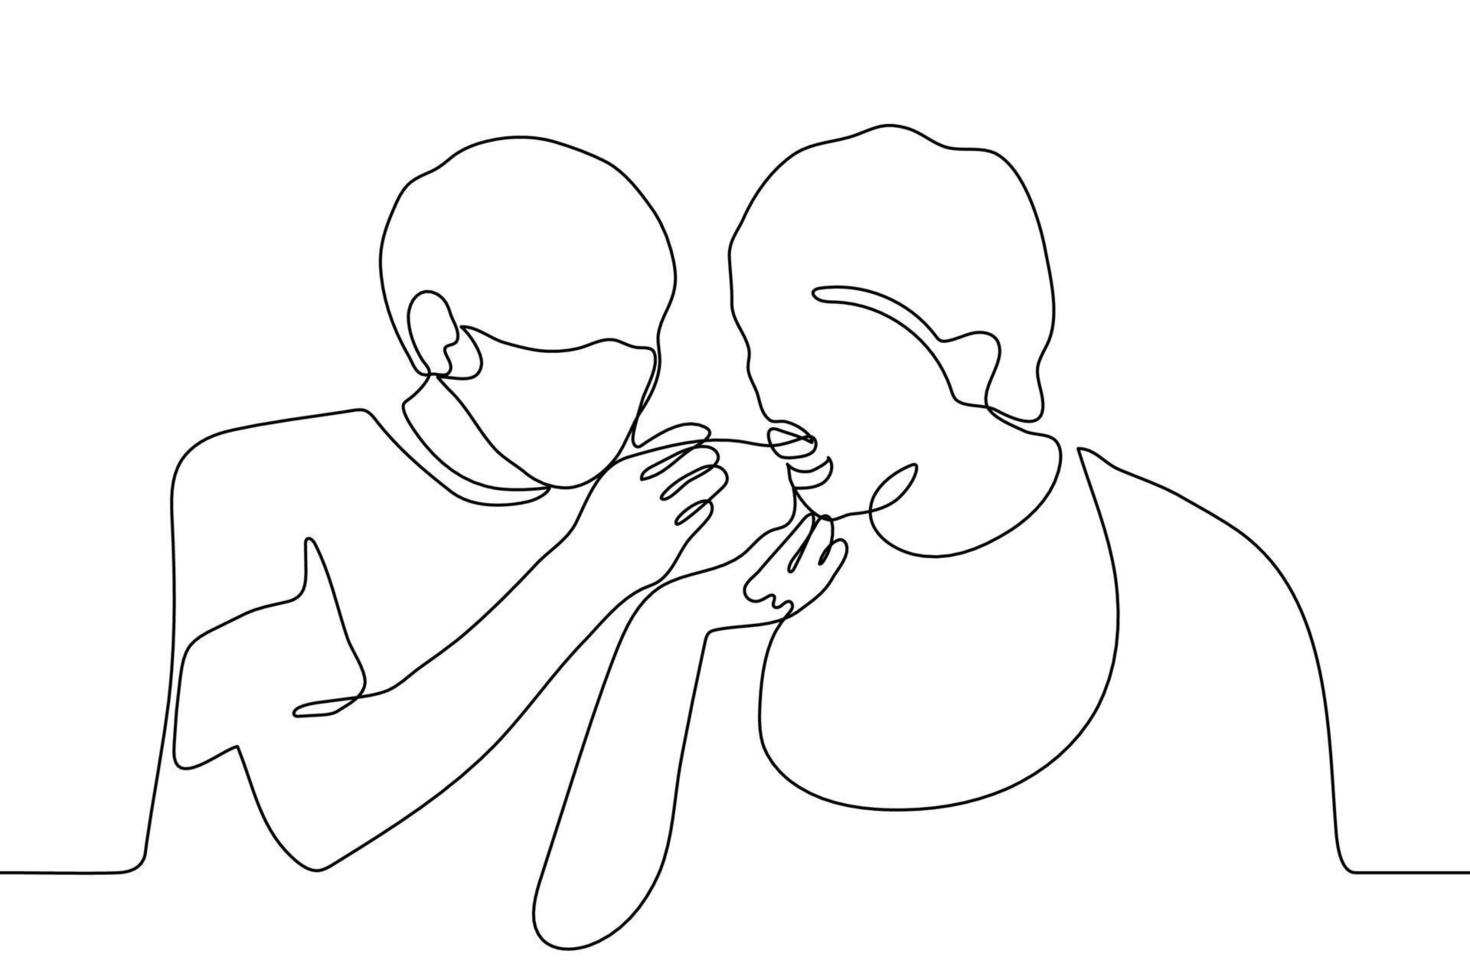 man in a mask feeds an old man from a spoon. one line drawing concept social worker feeding disabled old man vector